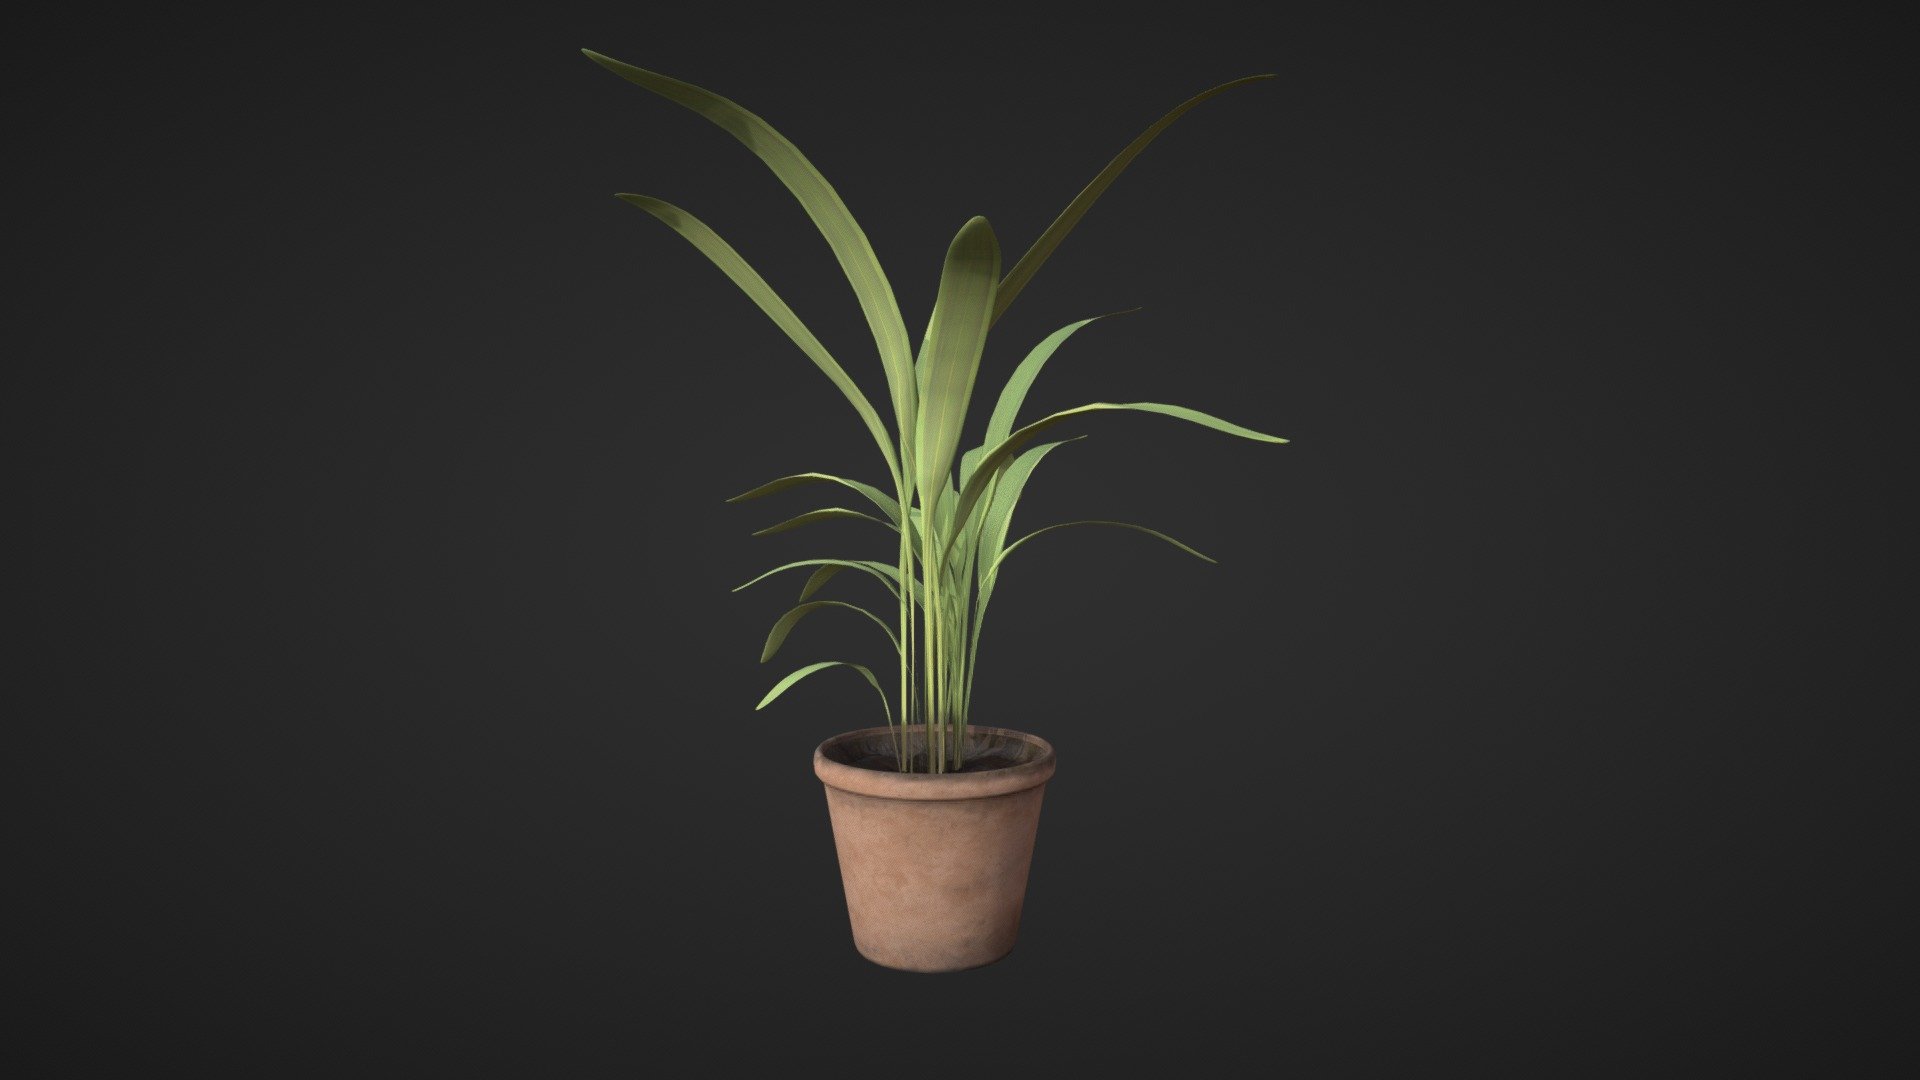 a little plant for decoration and stuff. its not perfect but i made it with love 

xoxo

SomeKevin

have a nice day, i love you - Palm Plant - Download Free 3D model by SomeKevin 3d model